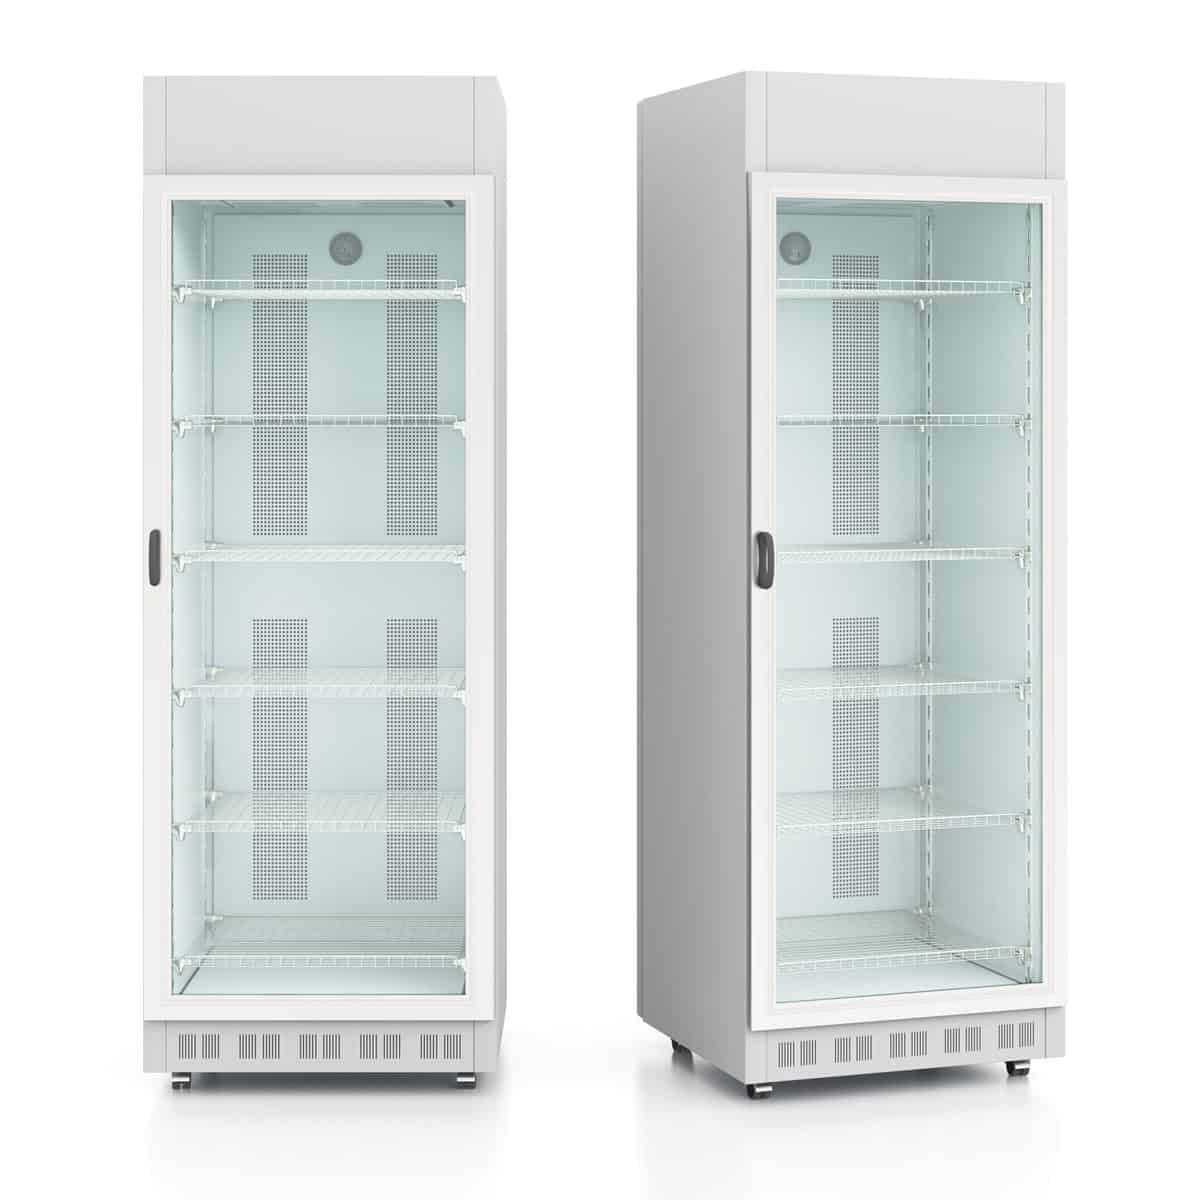 Two refrigerator units on a white background